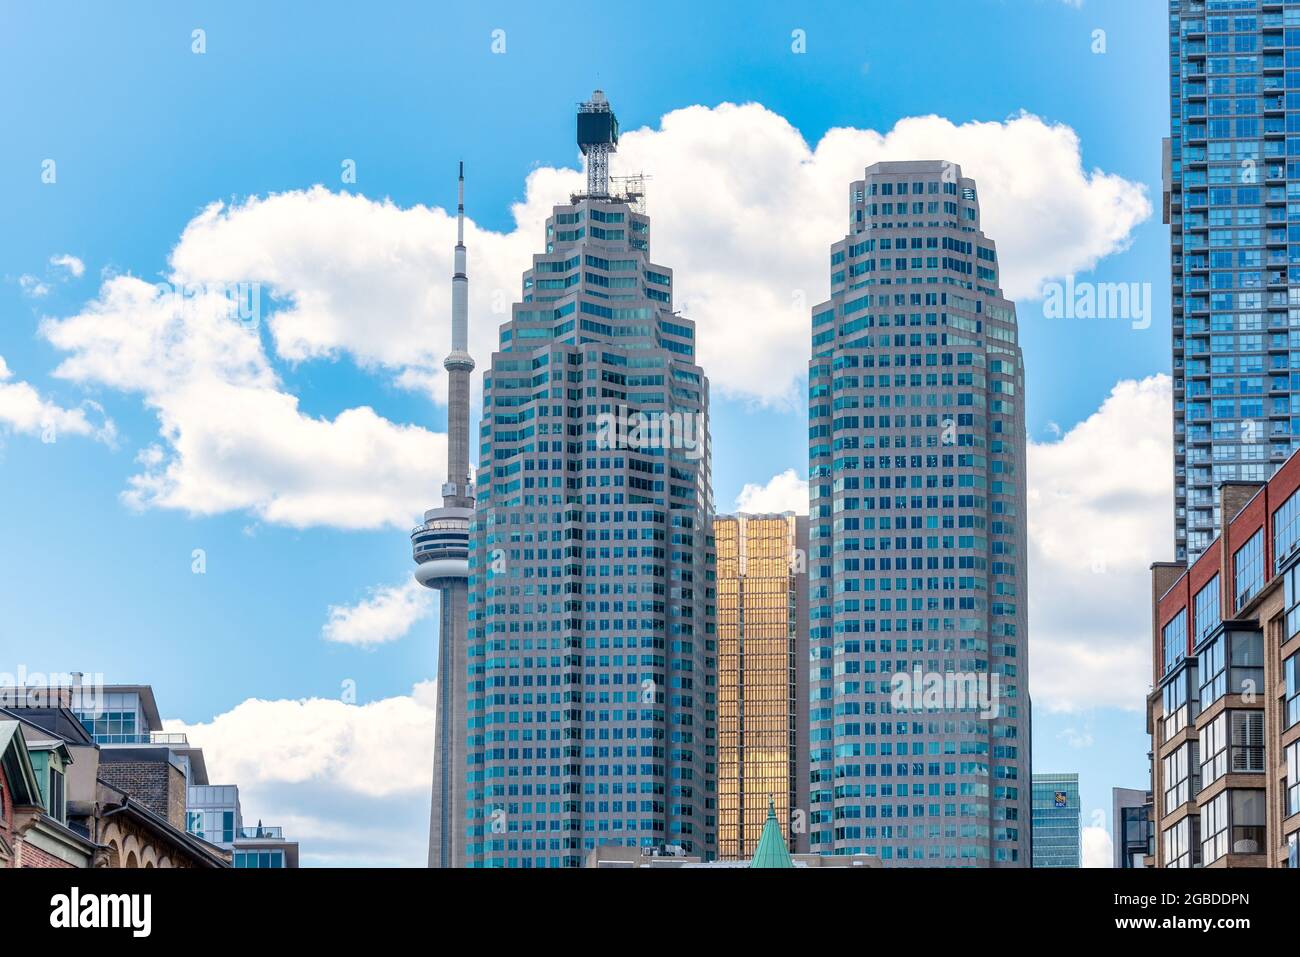 Urban skyline of the downtown and financial districts in Toronto, Canada. The image shows the CN Tower and the Brookfield Place twin towers Stock Photo